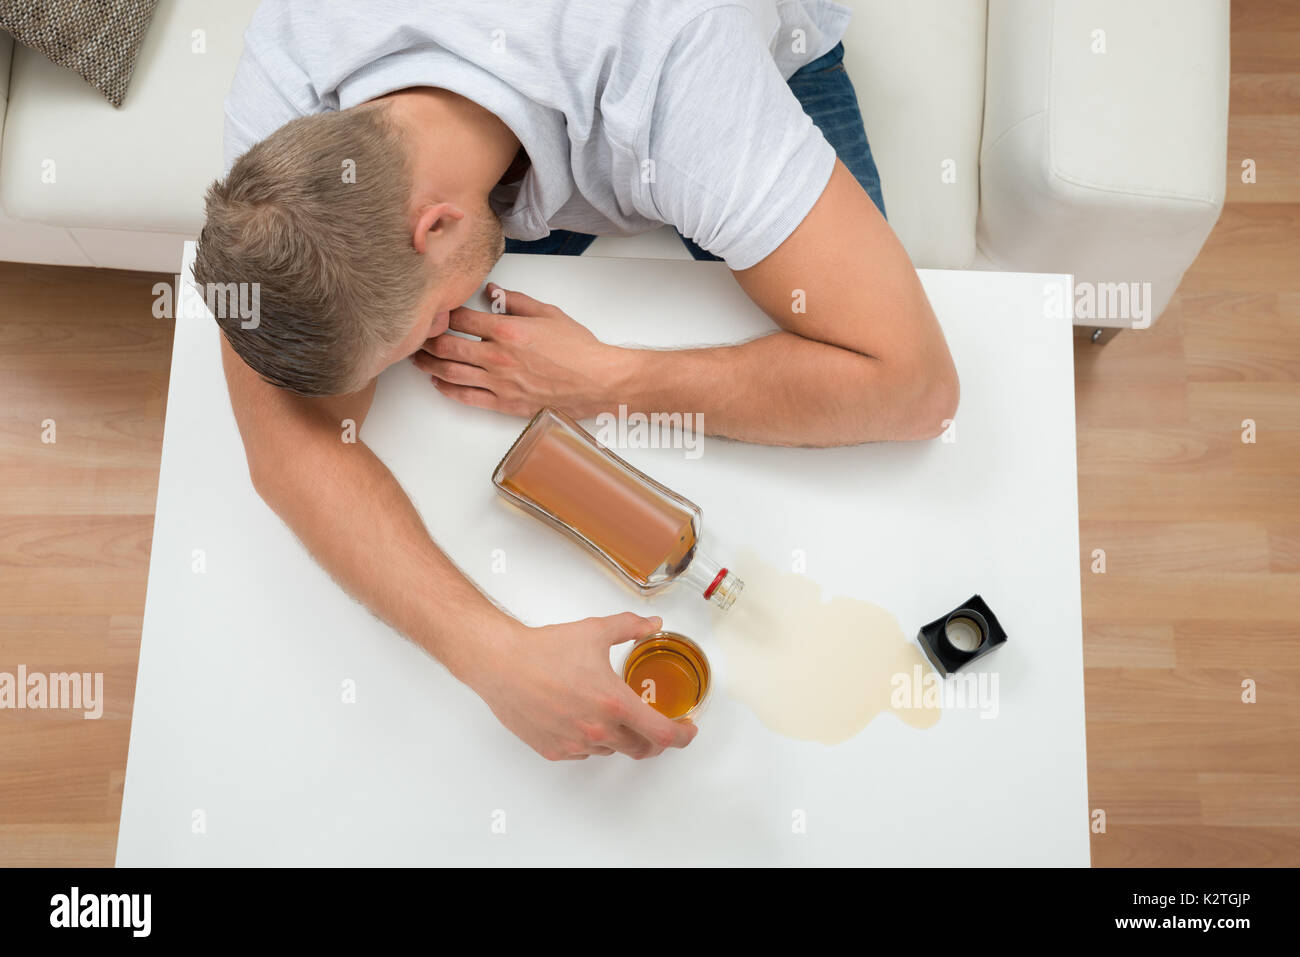 Young Drunk Man Sleeping On Table With Alcohol Bottle And Drinking Glass Stock Photo